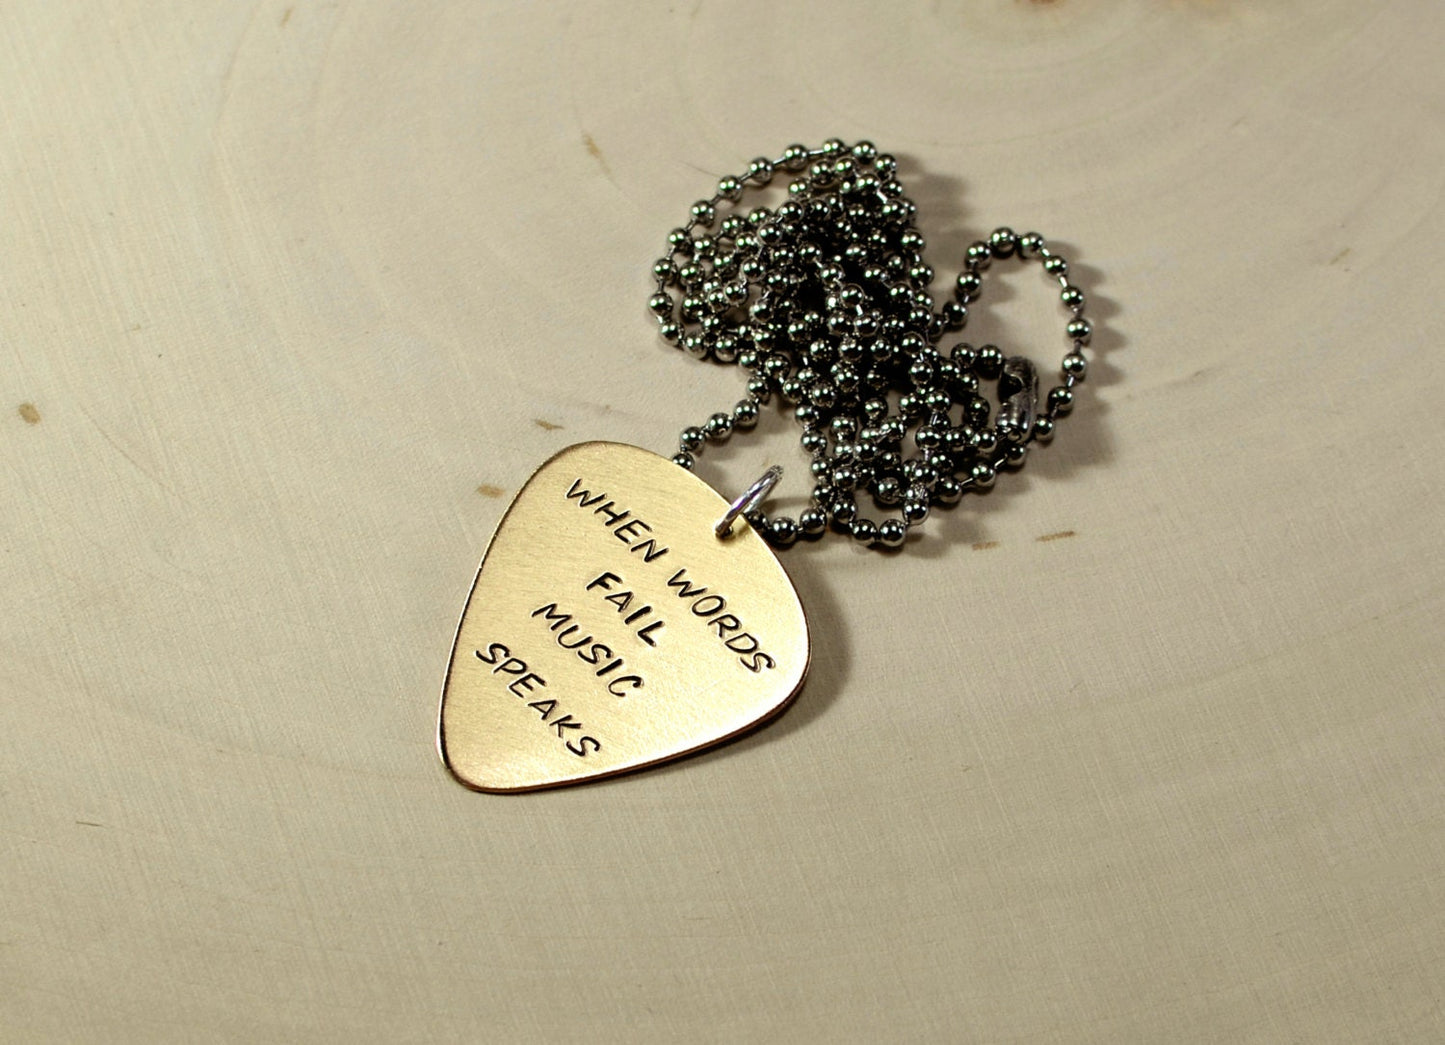 When words fail music speaks on a 14K solid yellow gold guitar pick necklace